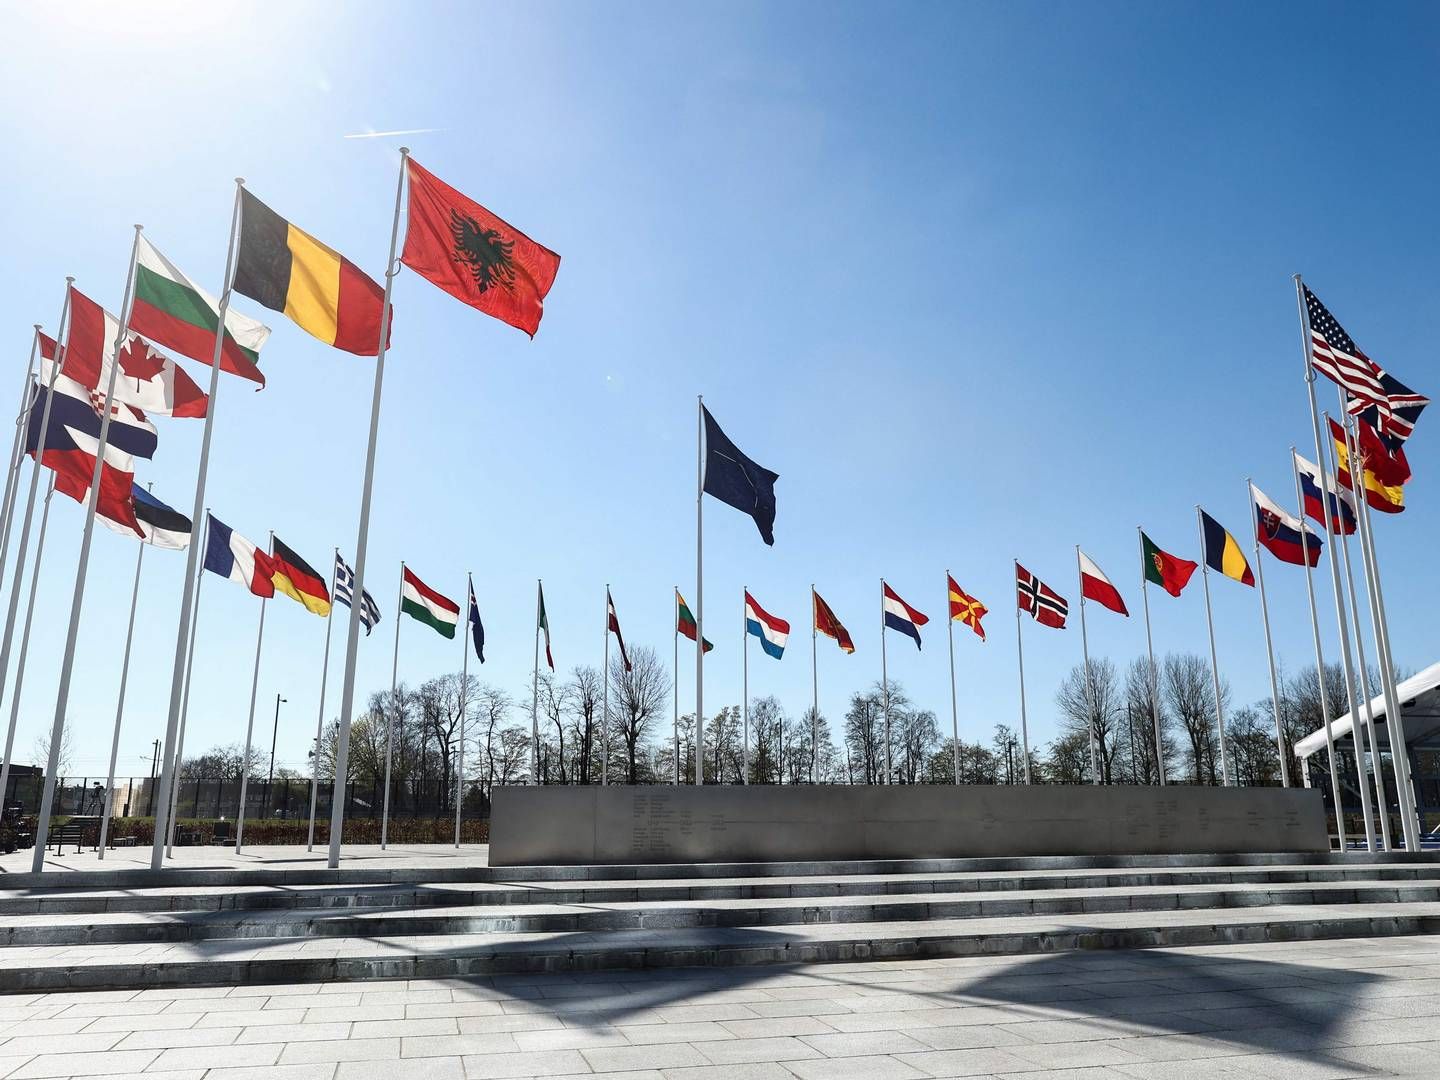 National flags of member countries in NATO flying outside organization headquarters in Brussels. On Tuesday around 15:45 CET, the Finnish flag will be raised among them | Photo: Kenzo Tribouillard/AFP/Ritzau Scanpix